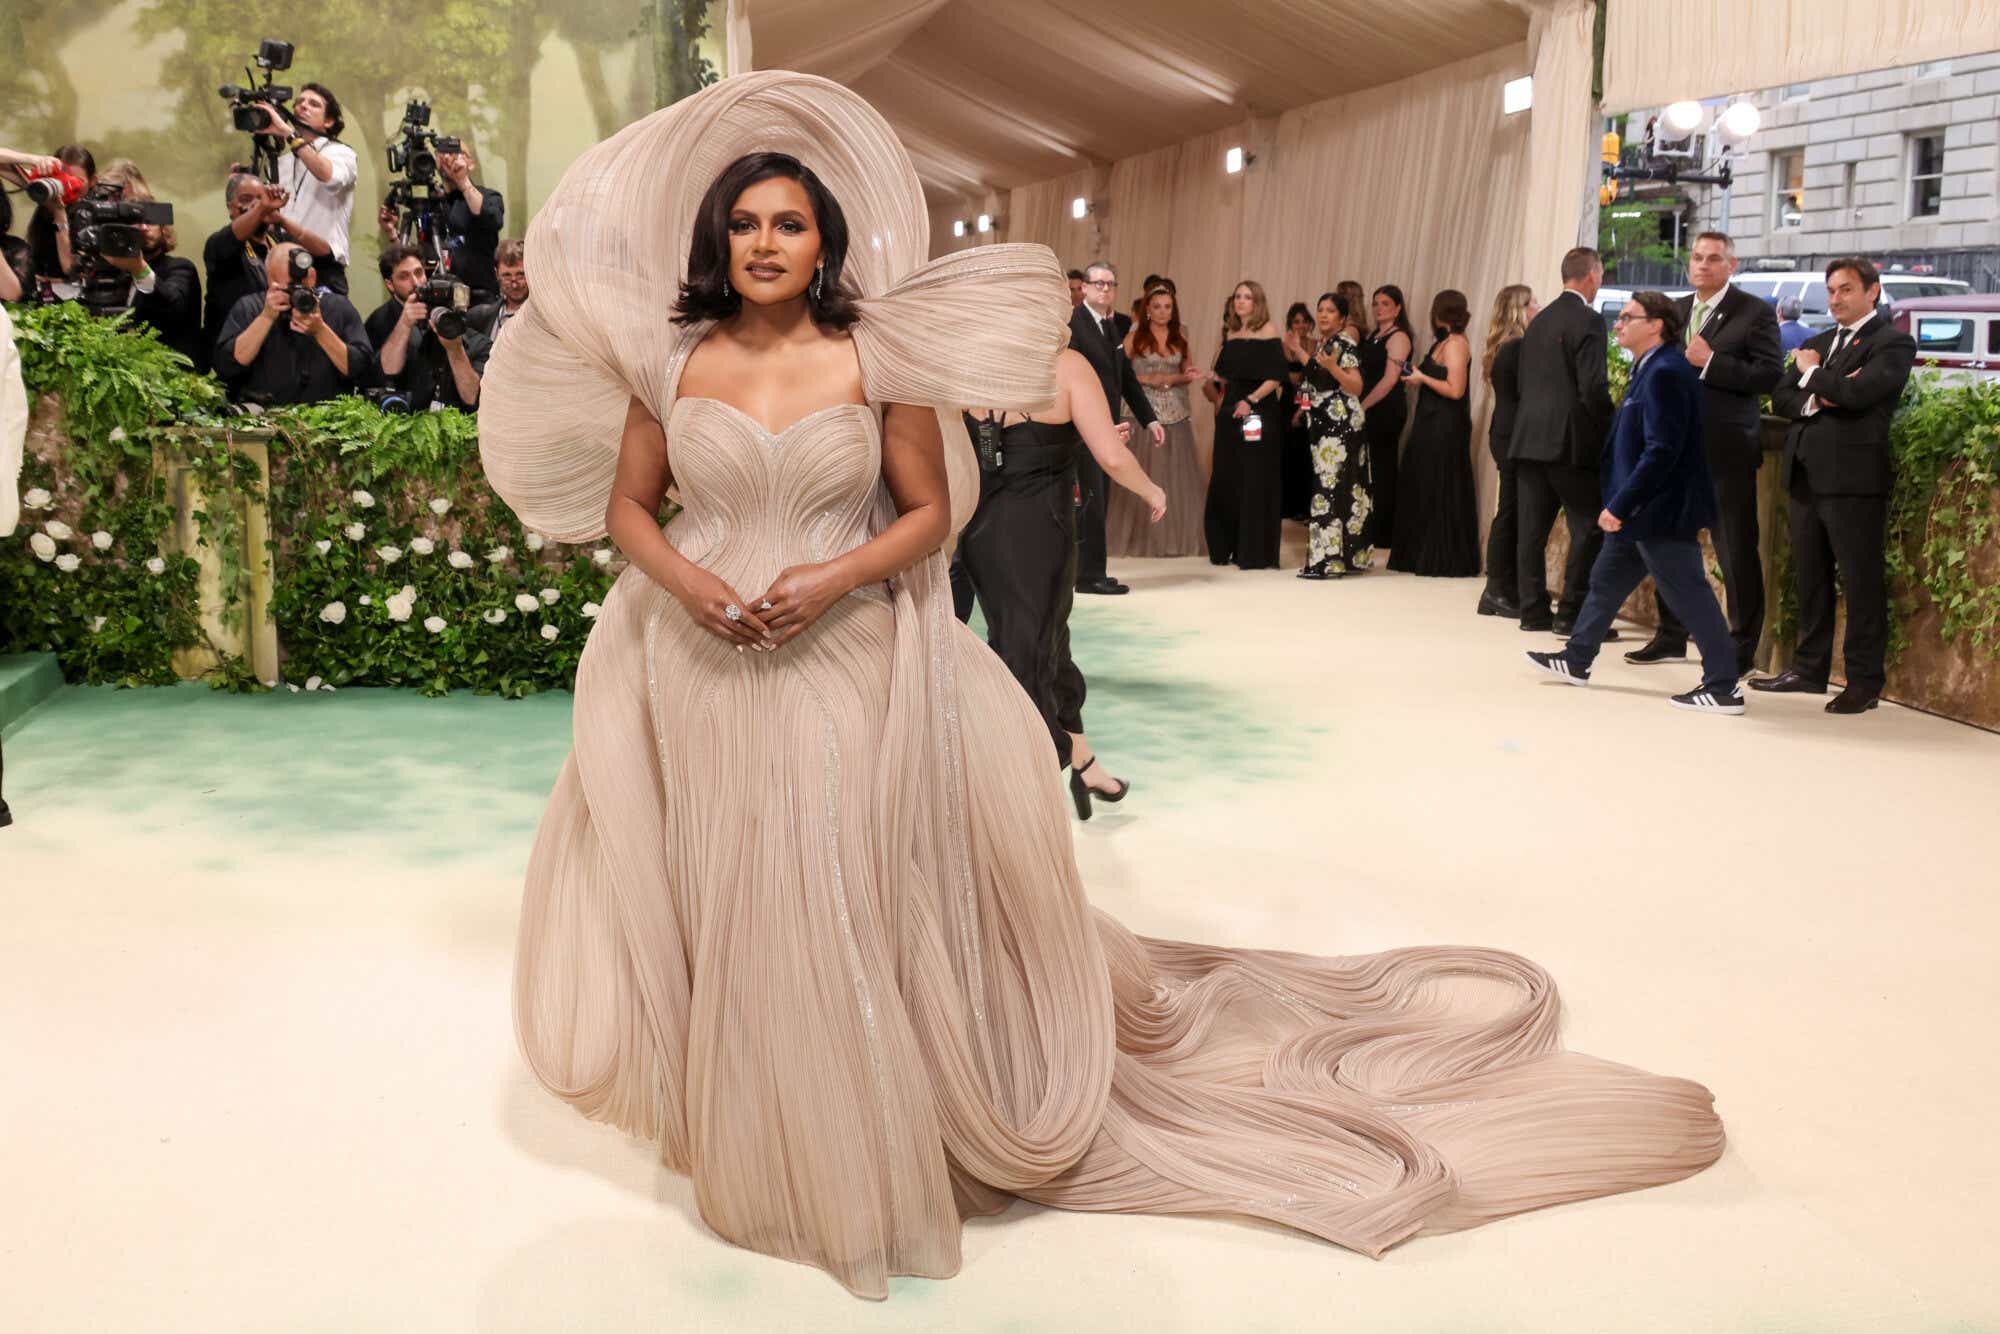 Mindy Kaling wears a beige dress with an ethereal over-the-head shoulder piece that matches the elegant draping of her gown.